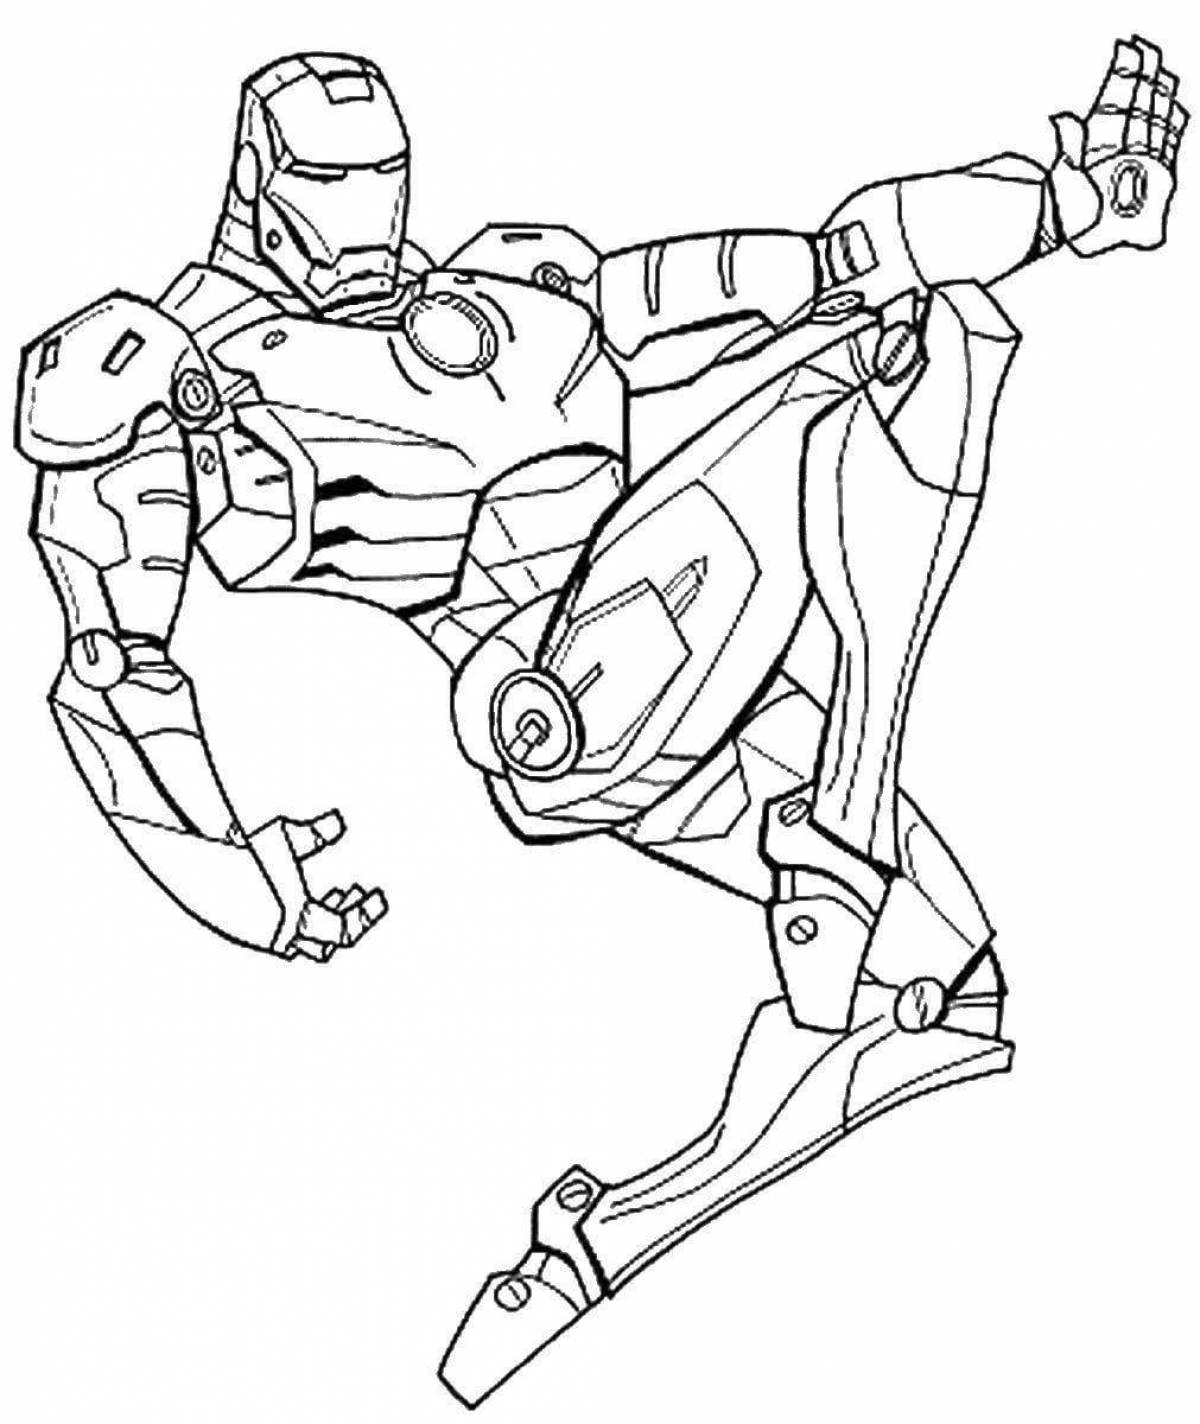 Bright iron man coloring pages for kids